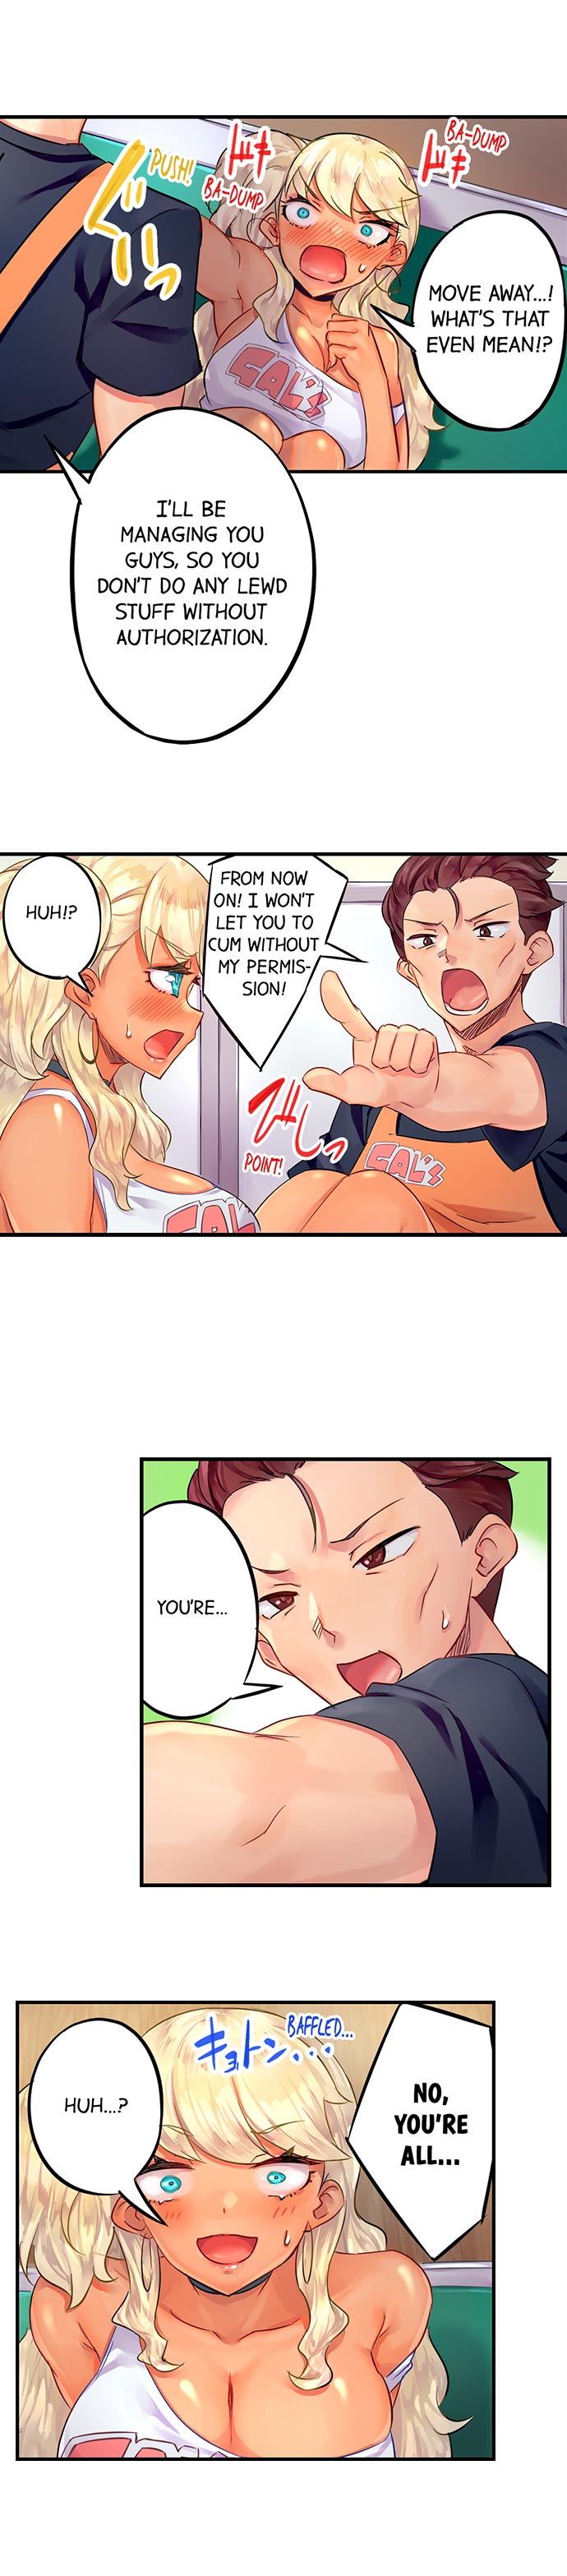 Orgasm Management for This Tanned Girl - Chapter 2 Page 2